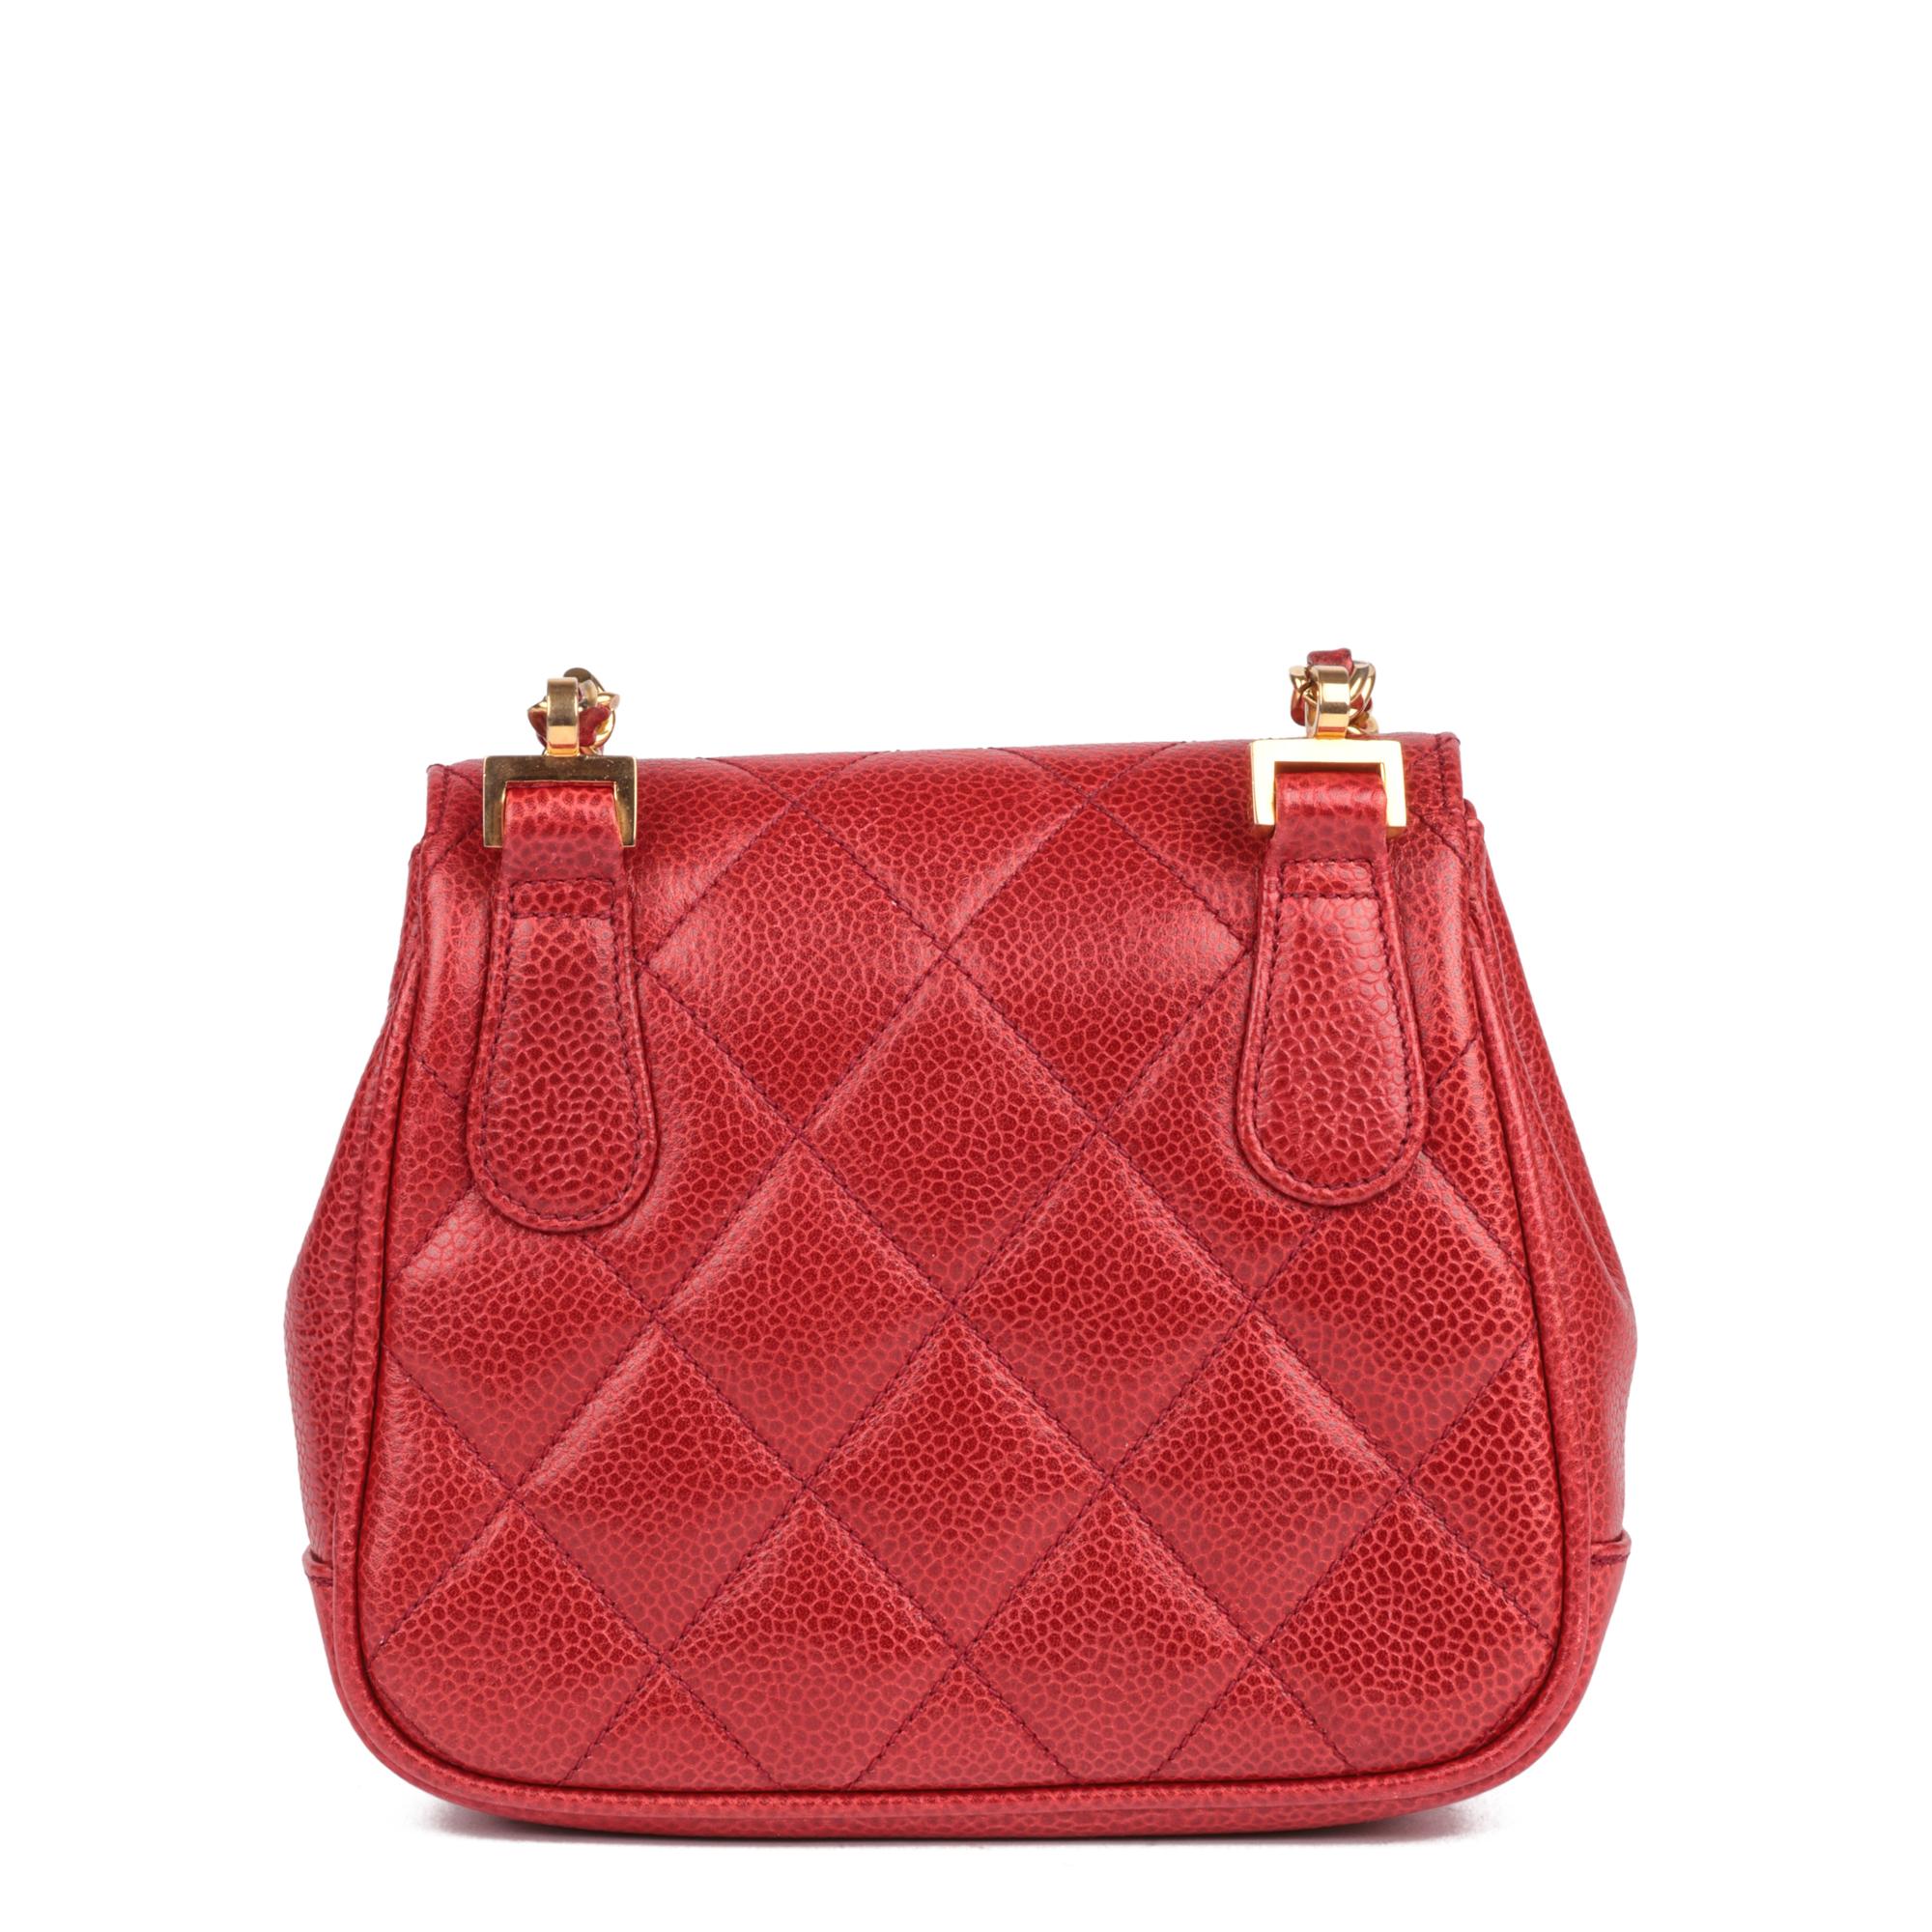 CHANEL Red Quilted Caviar Leather Vintage Mini Flap Bag For Sale 1